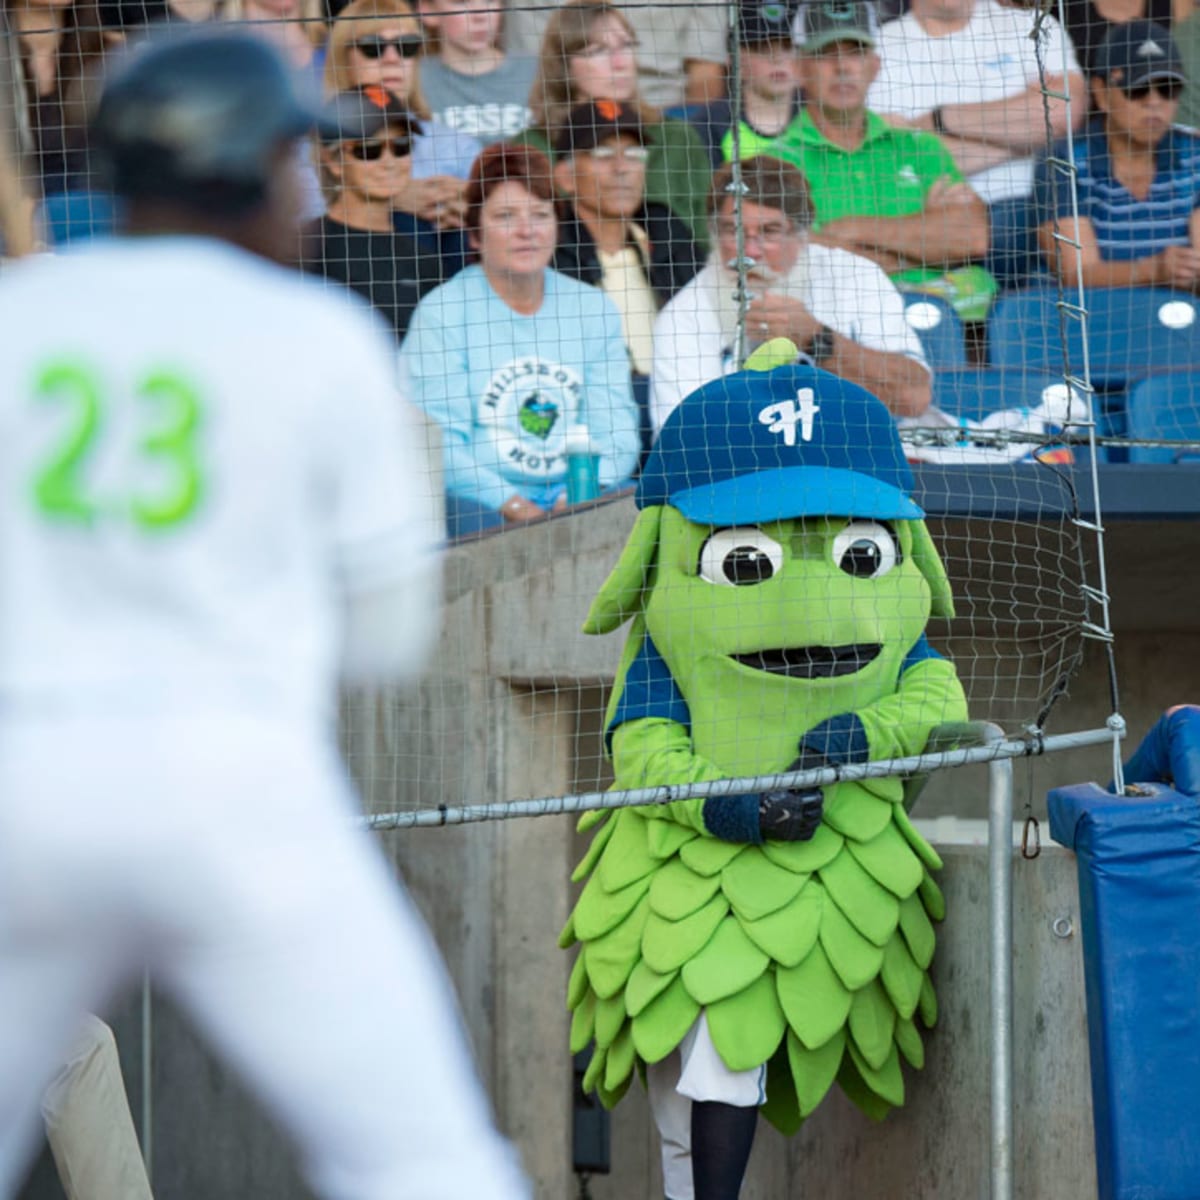 Tacoma's Rhubarb in running for minor league baseball's best mascot